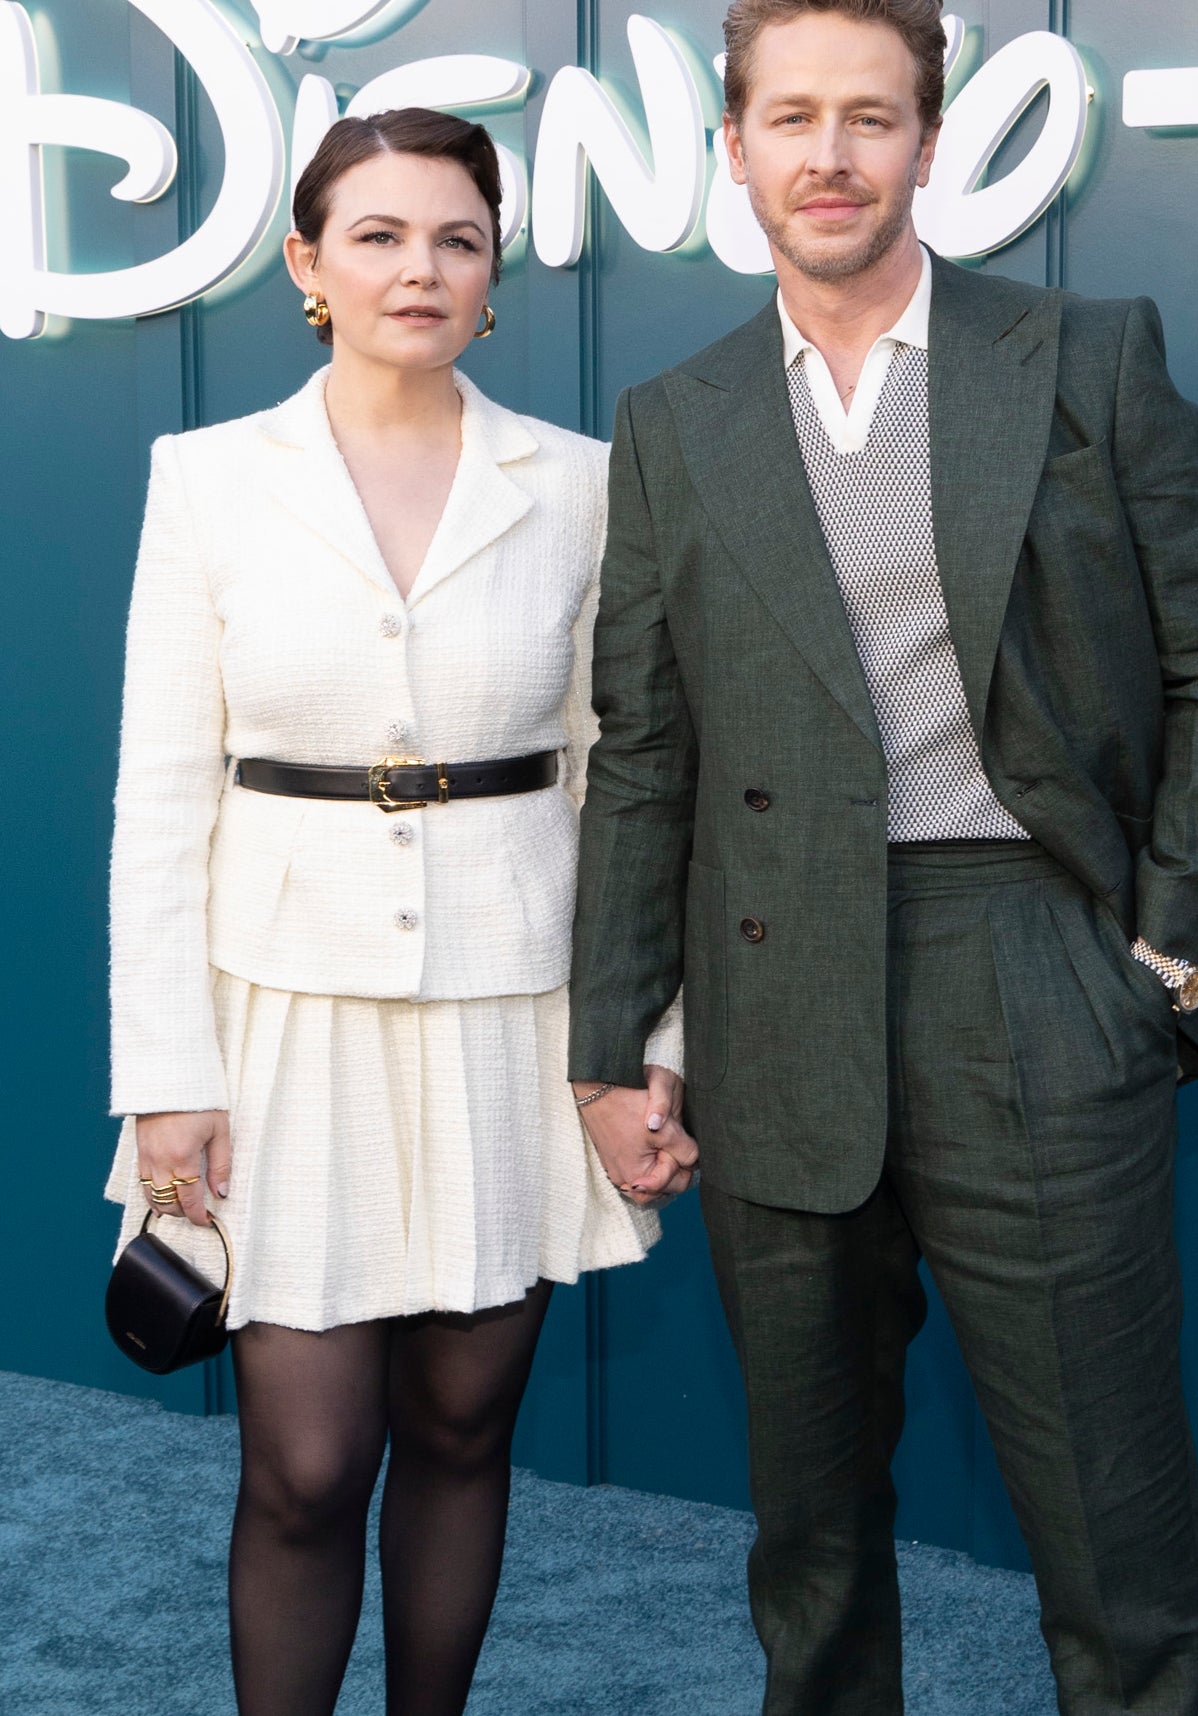 Two celebrities pose at a Disney+ event; one wears a white jacket and skirt combo, the other a green suit